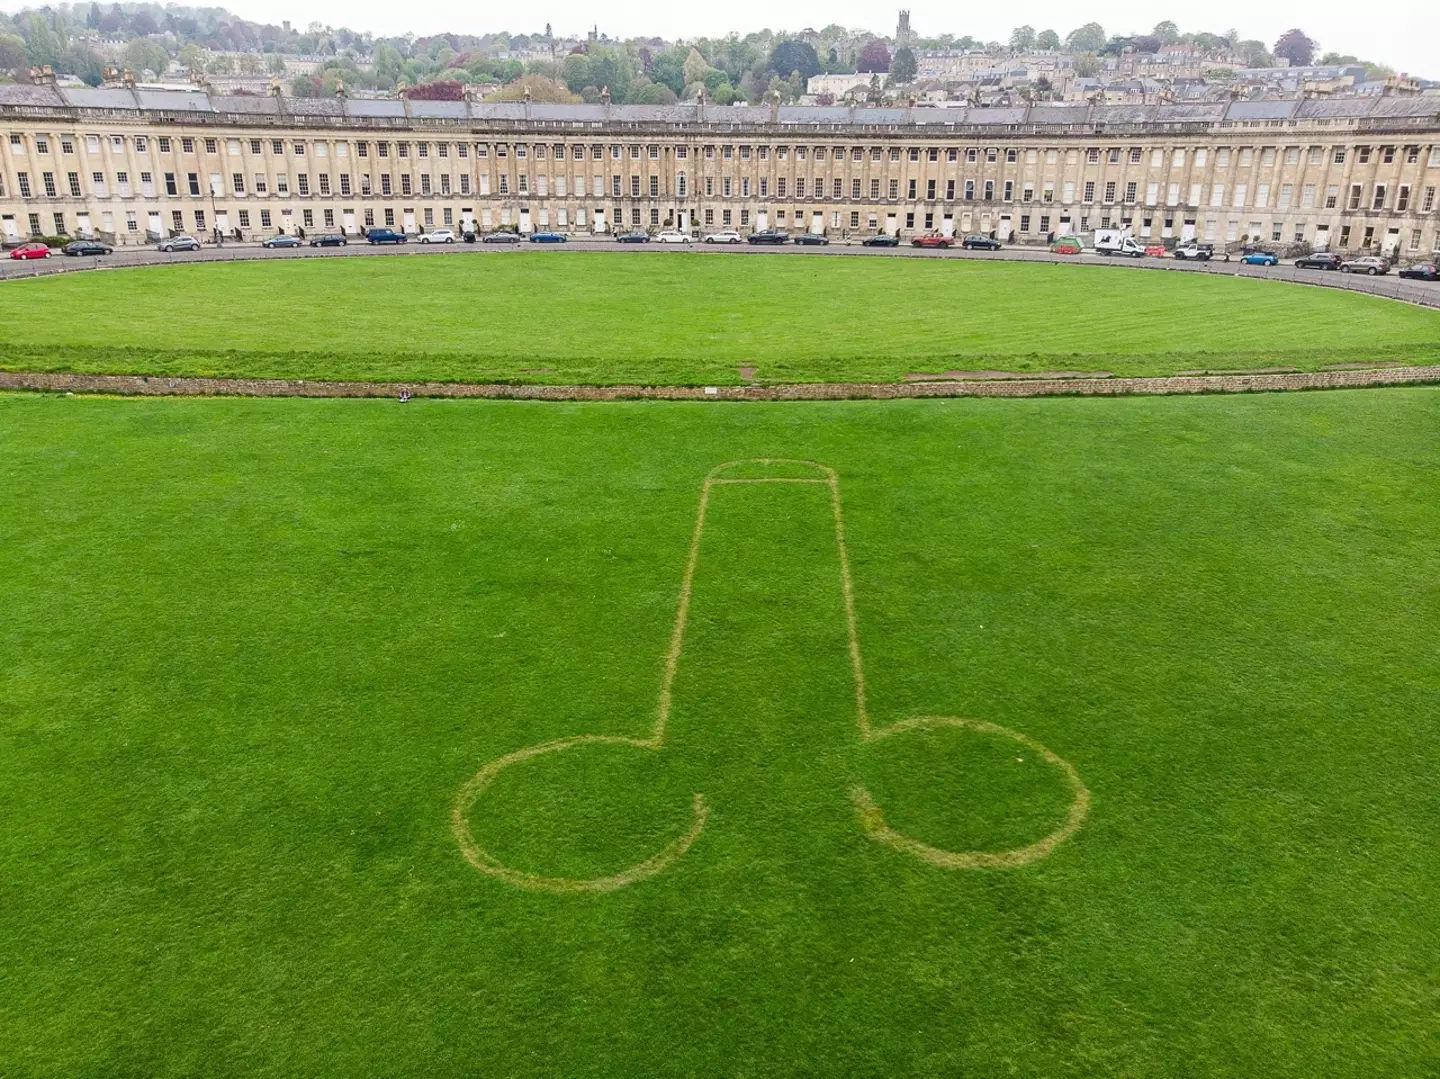 Just days before the Coronation party, cocky pranksters have mowed a large willy into a 'perfect lawn' on one of Britain's most famous streets.